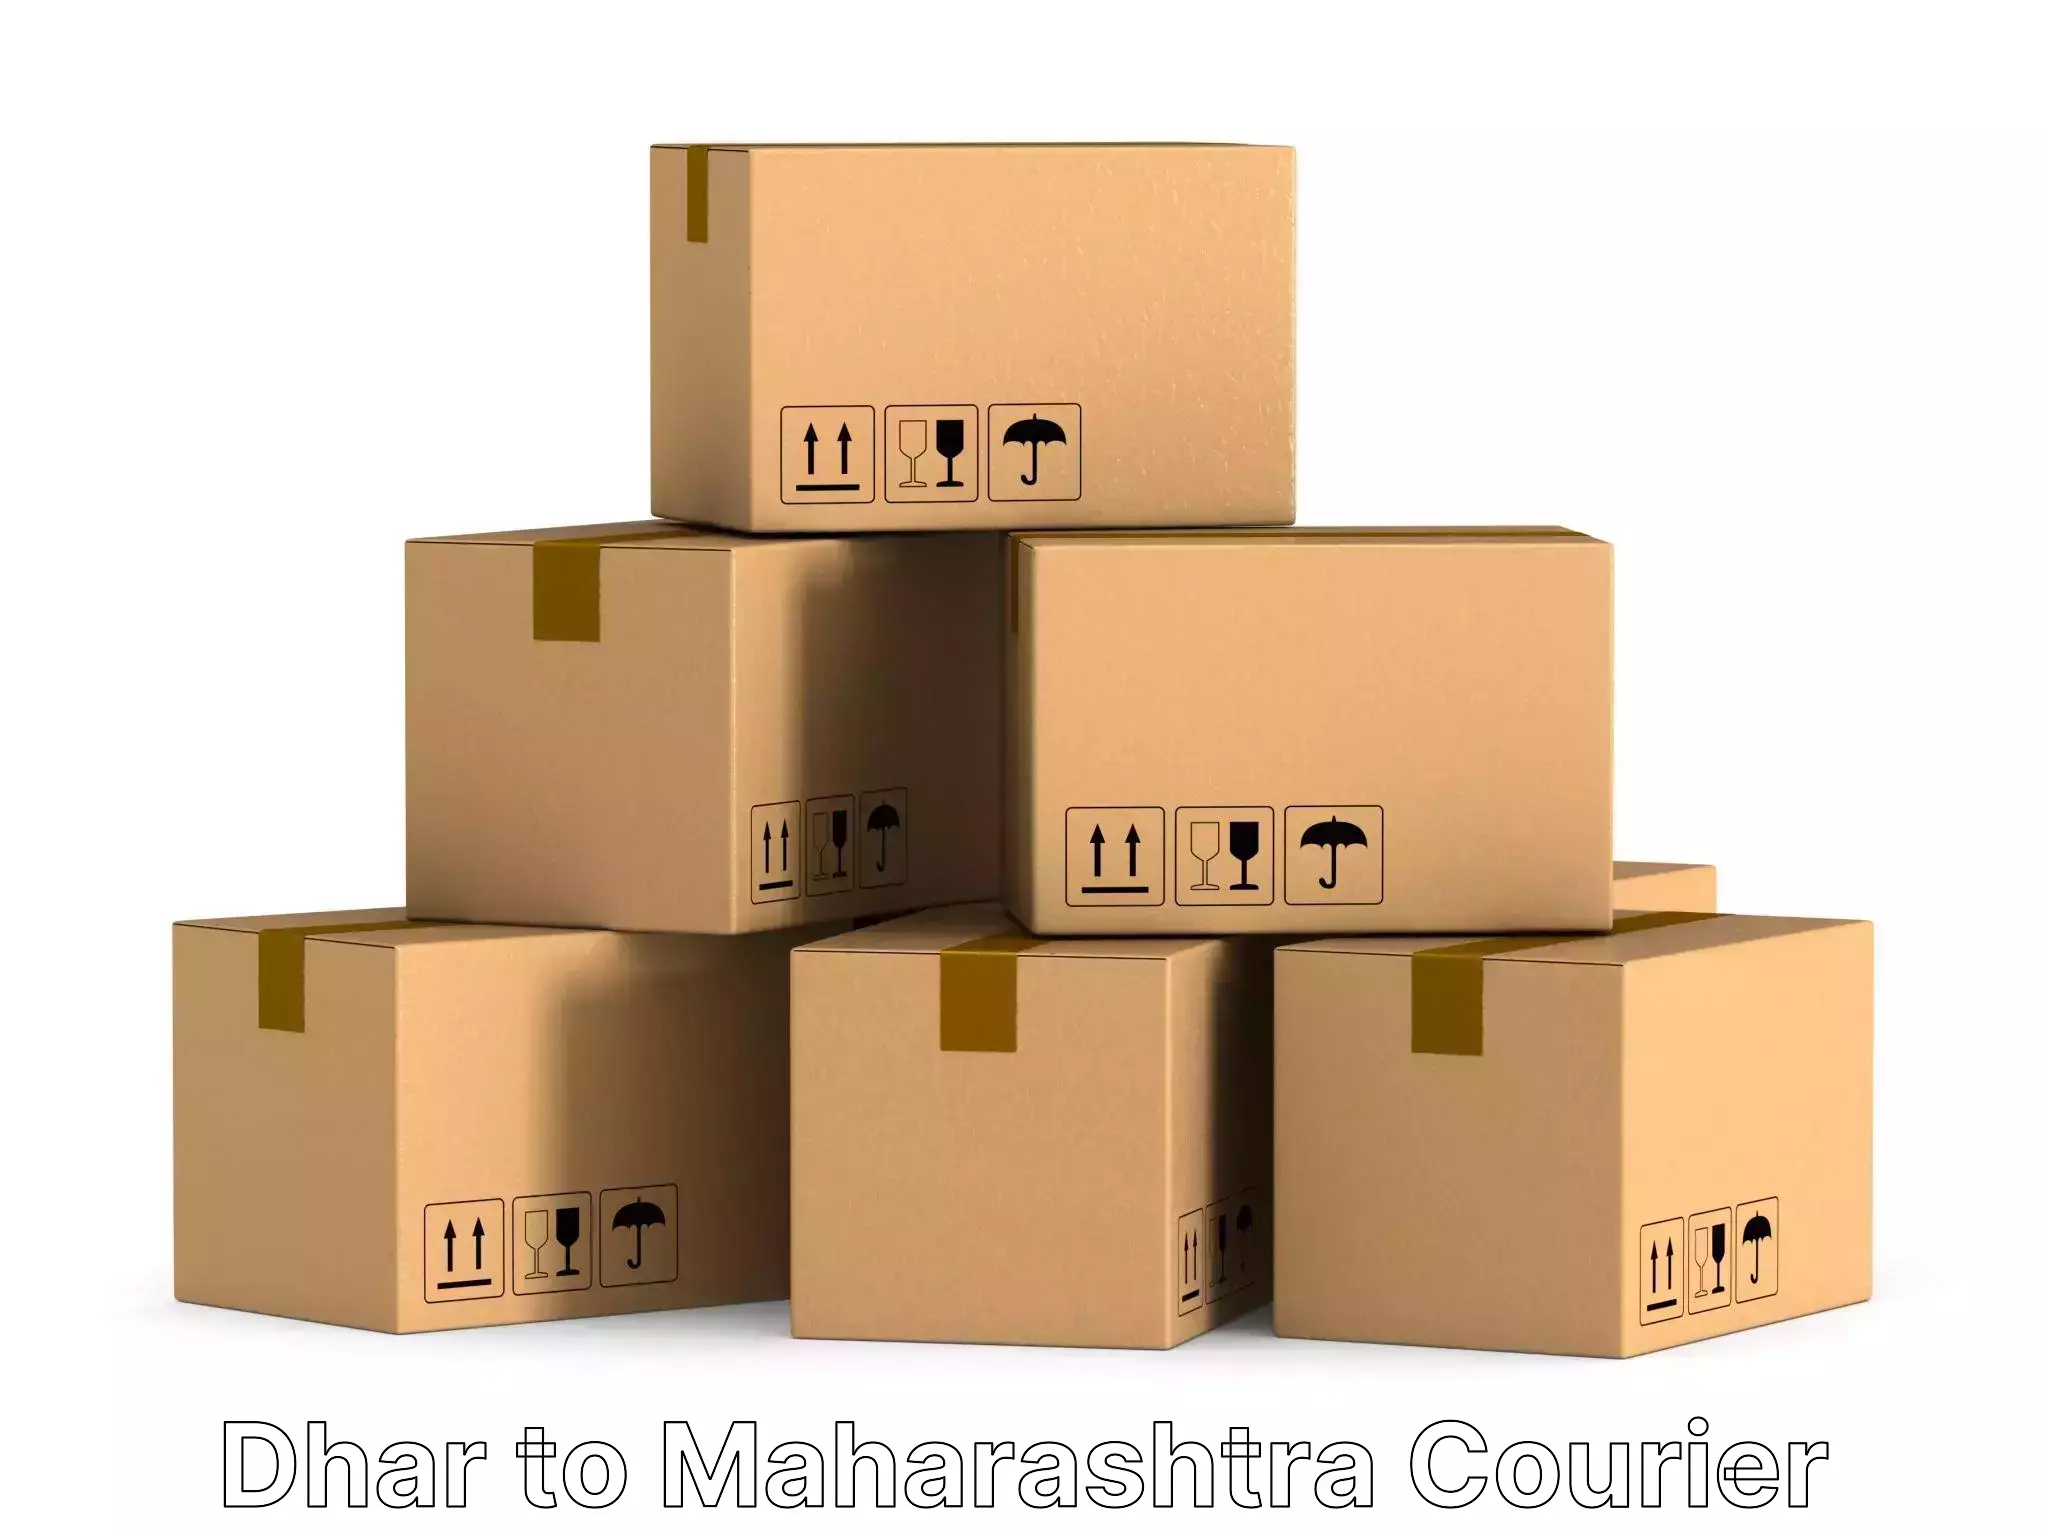 Trusted relocation experts Dhar to Maharashtra